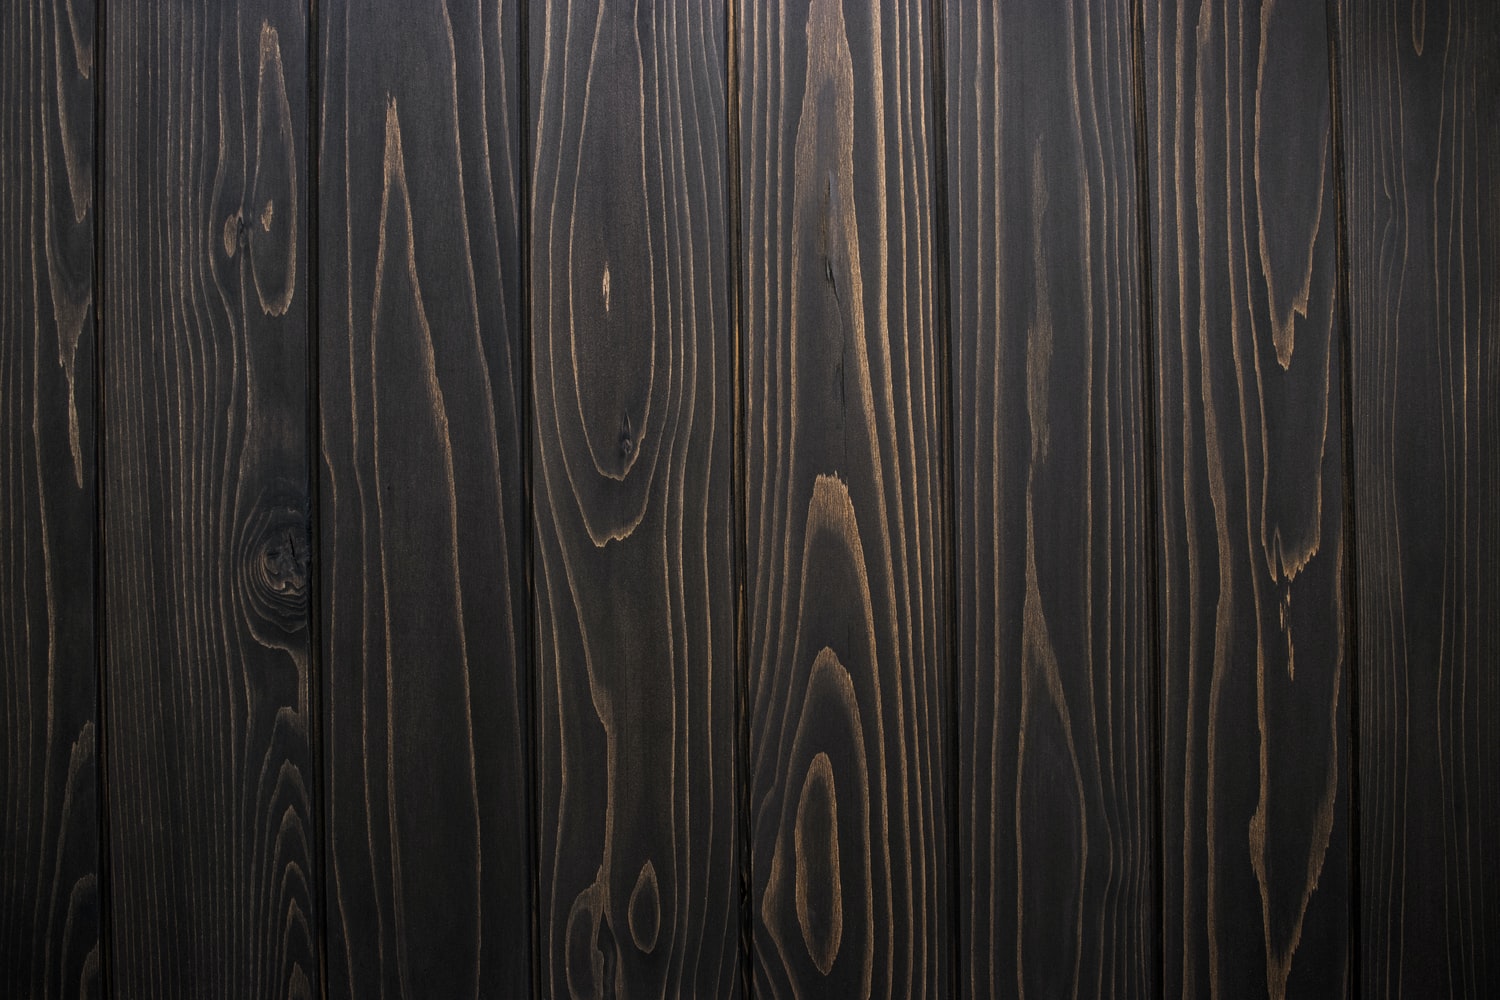 50 Beautiful Free Wood Textures to Download Today | 2020 Update - Web